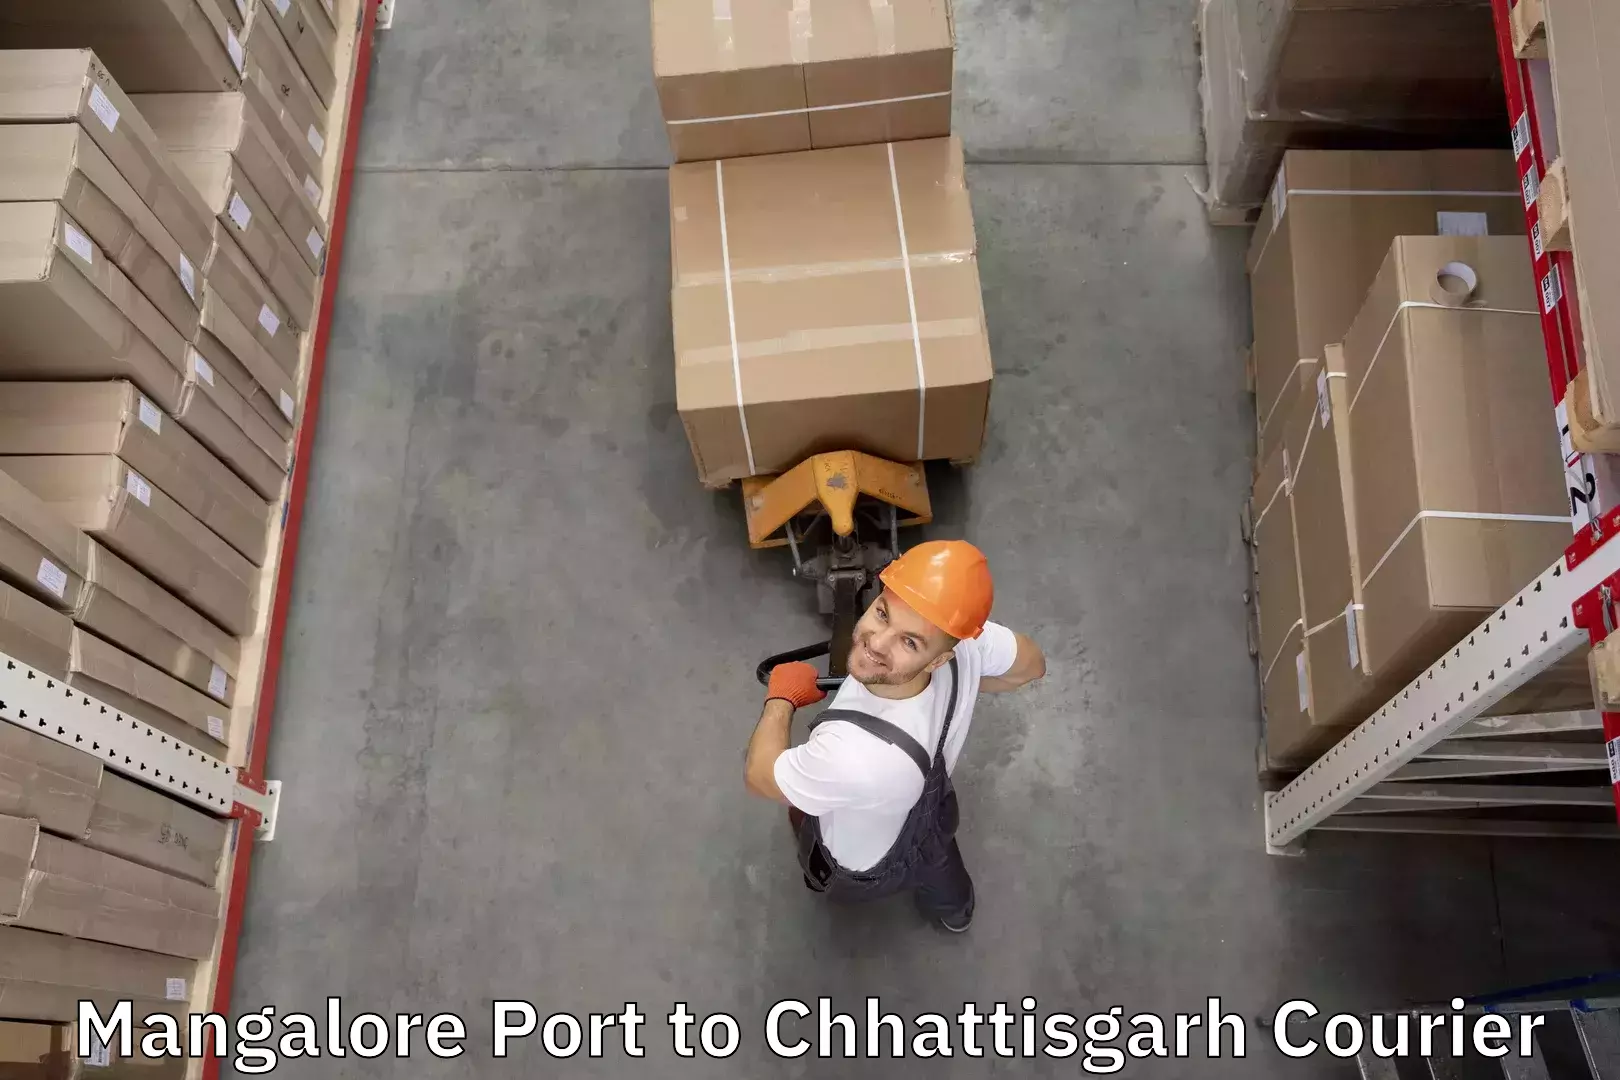 Automated luggage transport in Mangalore Port to Chhattisgarh